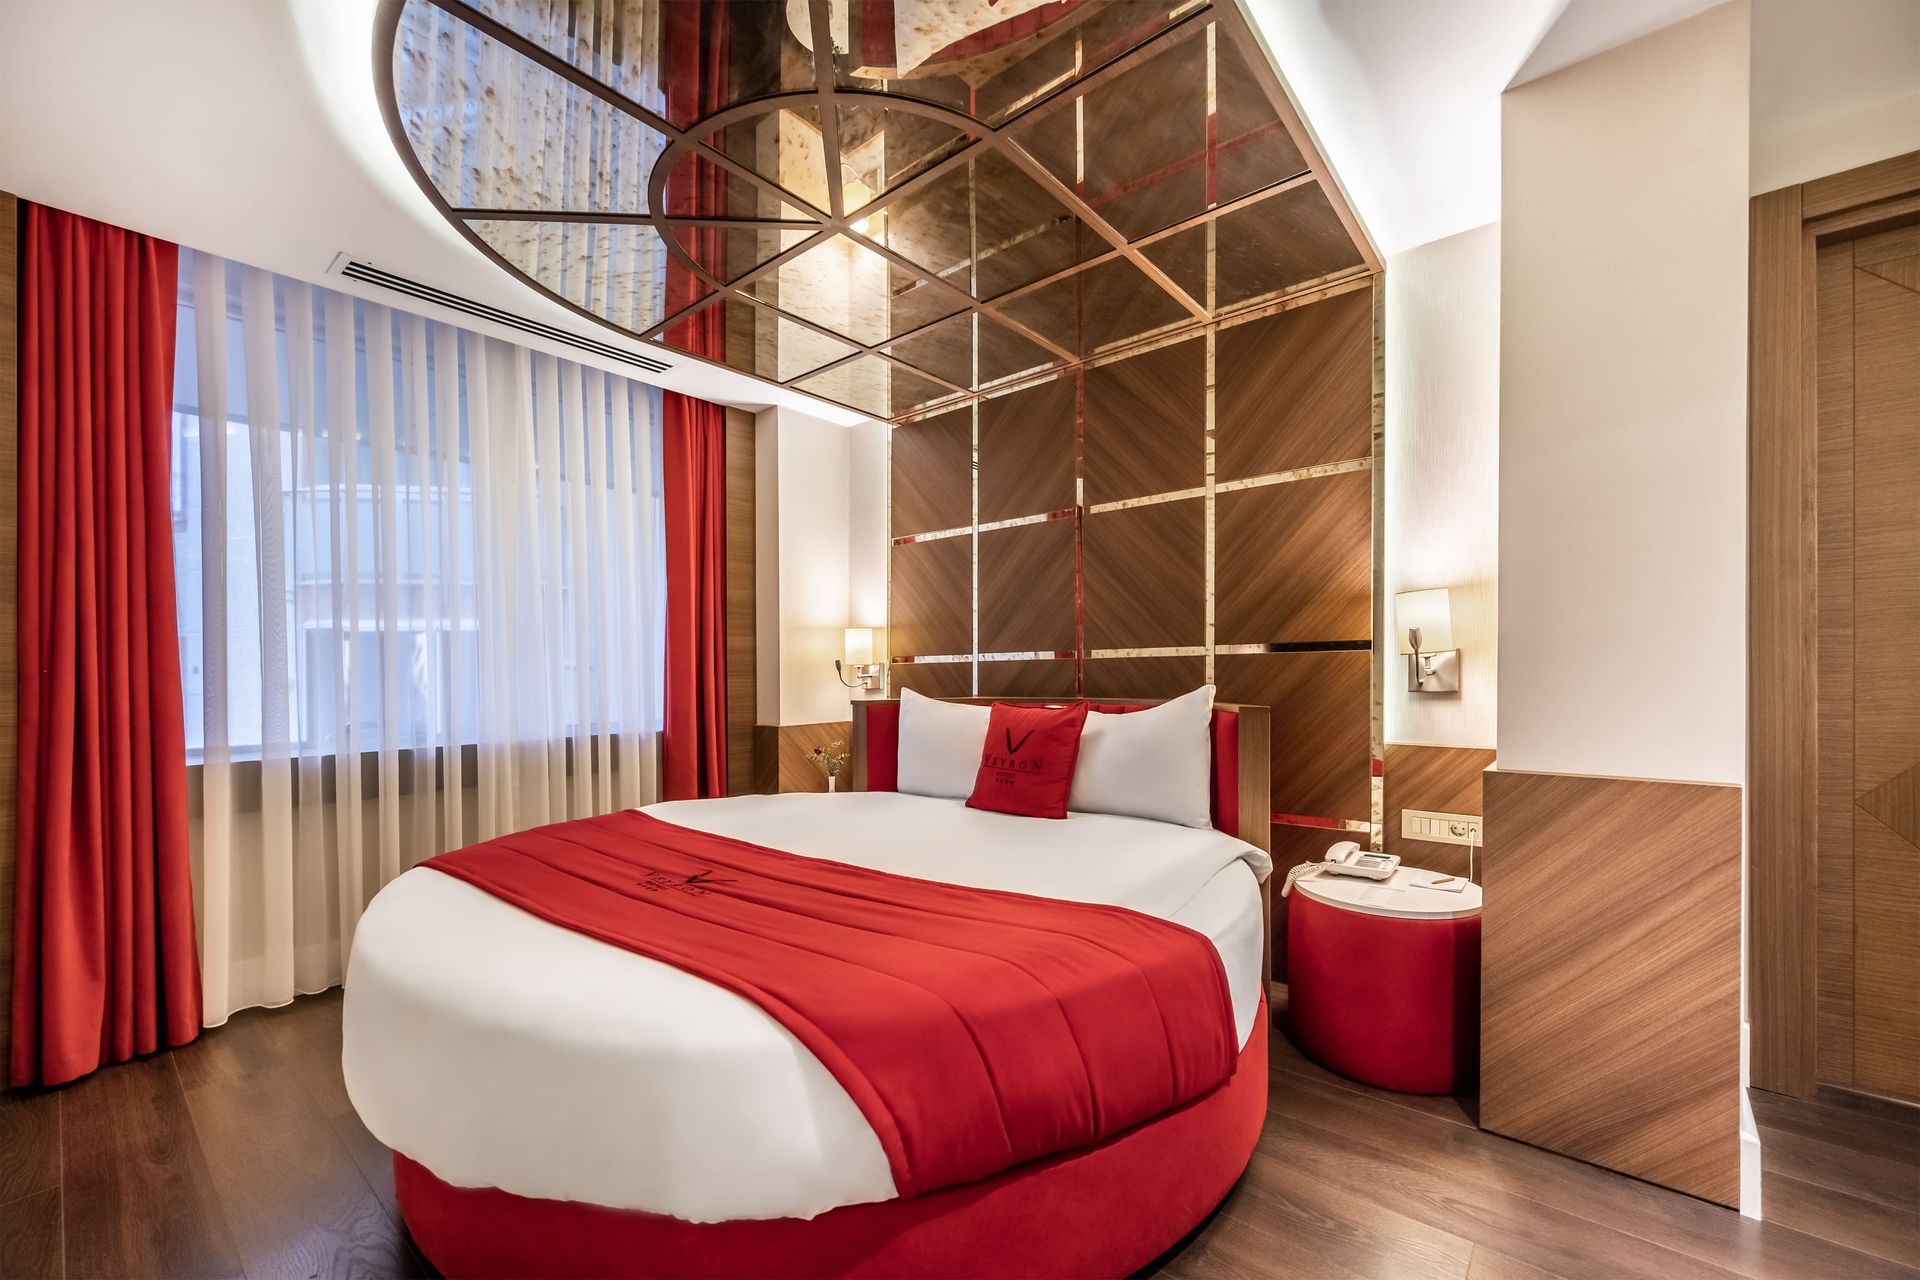 Veyron Hotels & Spa, İstanbul, Family Room